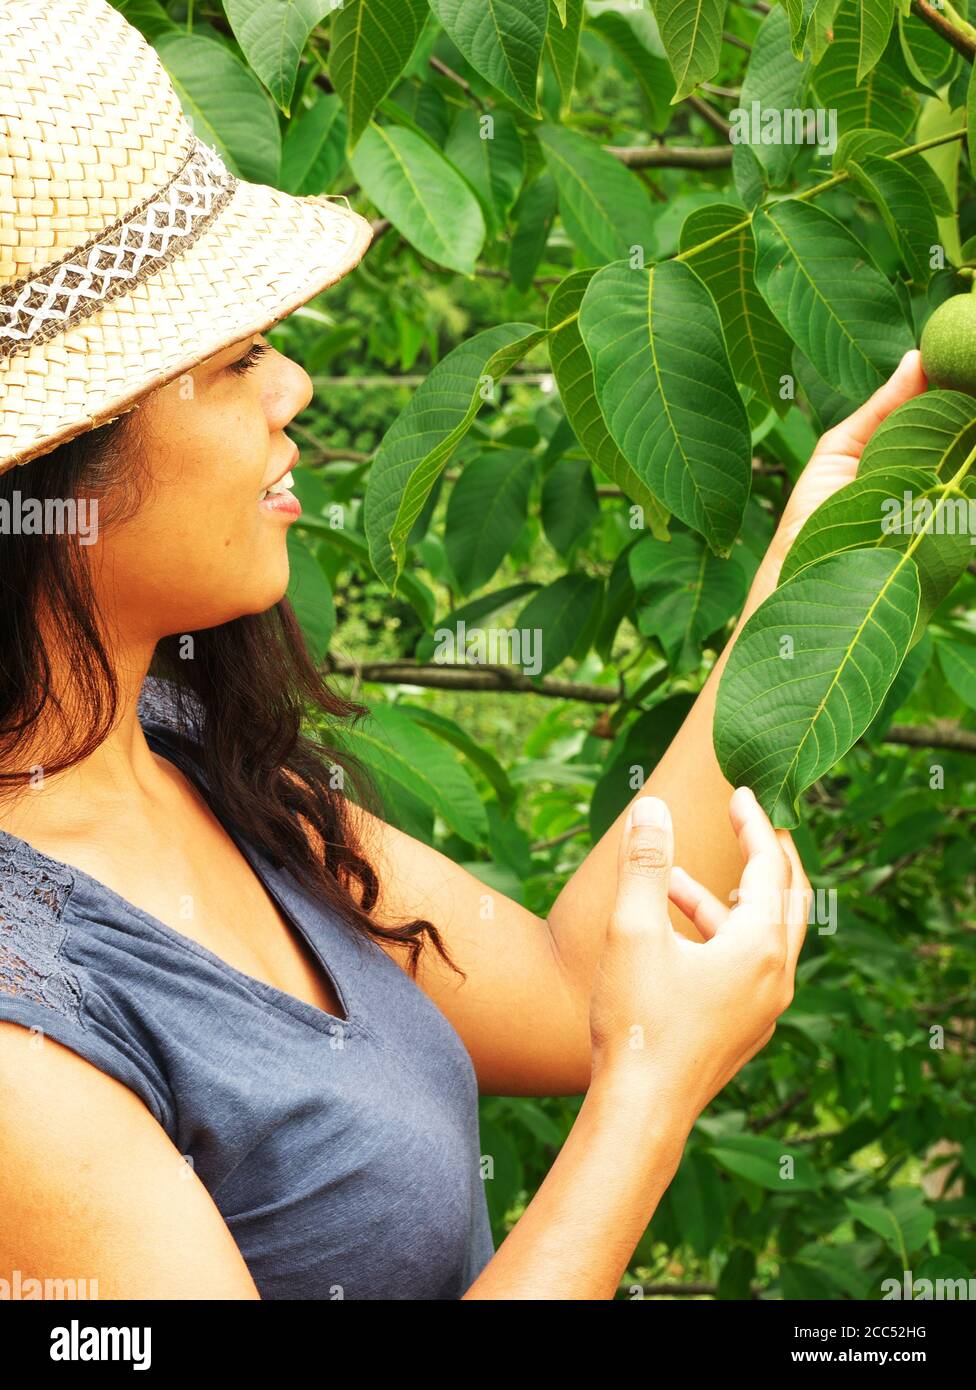 Close-up of an Afro-Asian woman picking fruit from a tree. Stock Photo